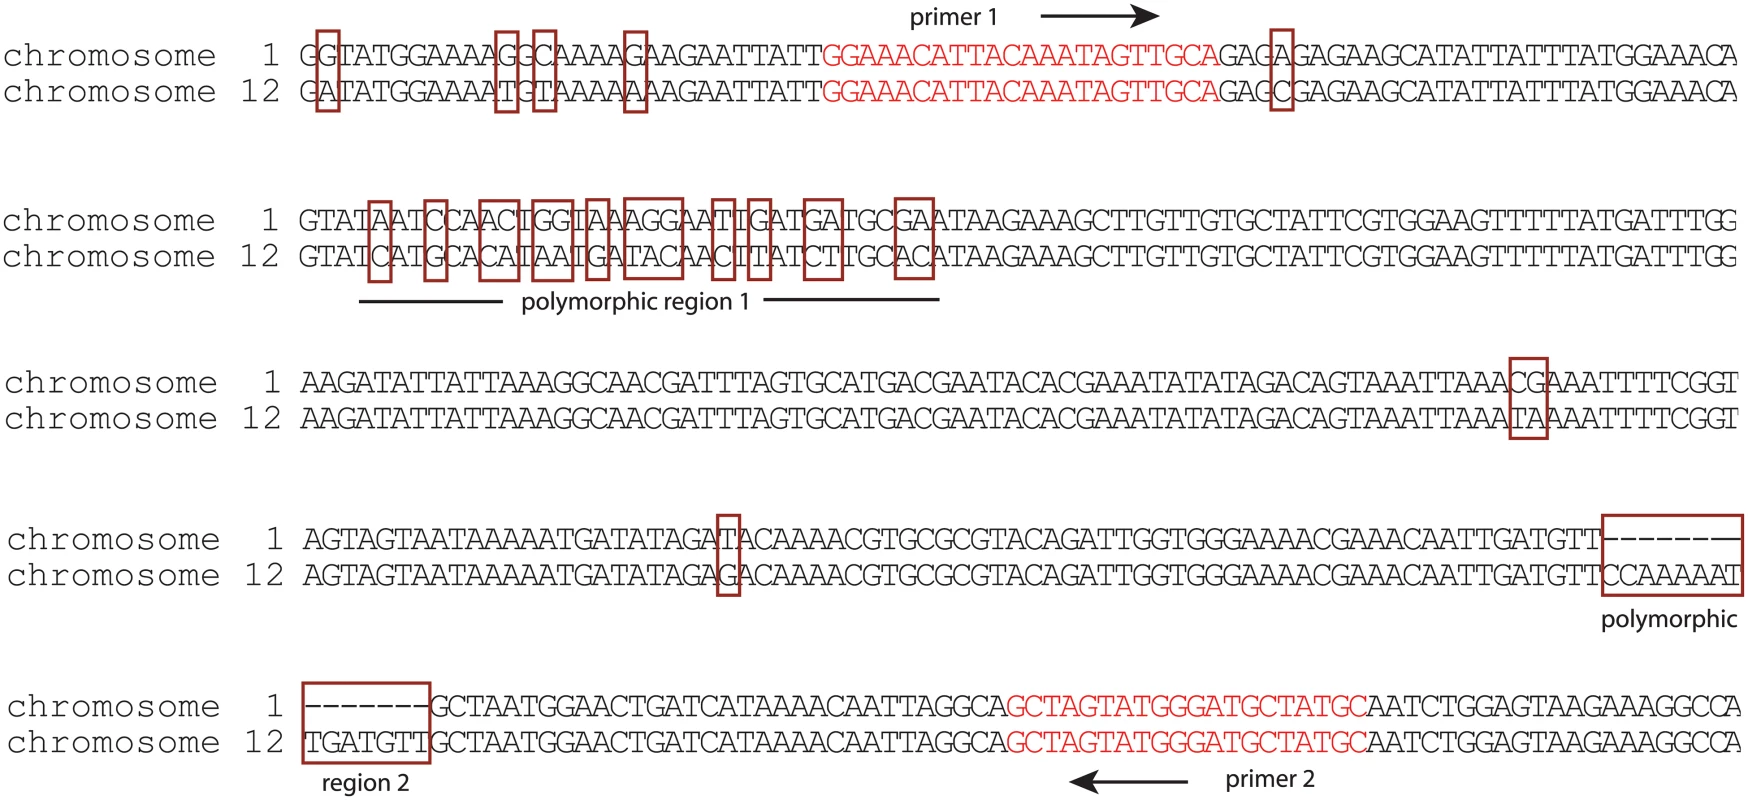 Induction of <i>var2csa</i> in HB3 specifically activates the locus on chromosome 12.